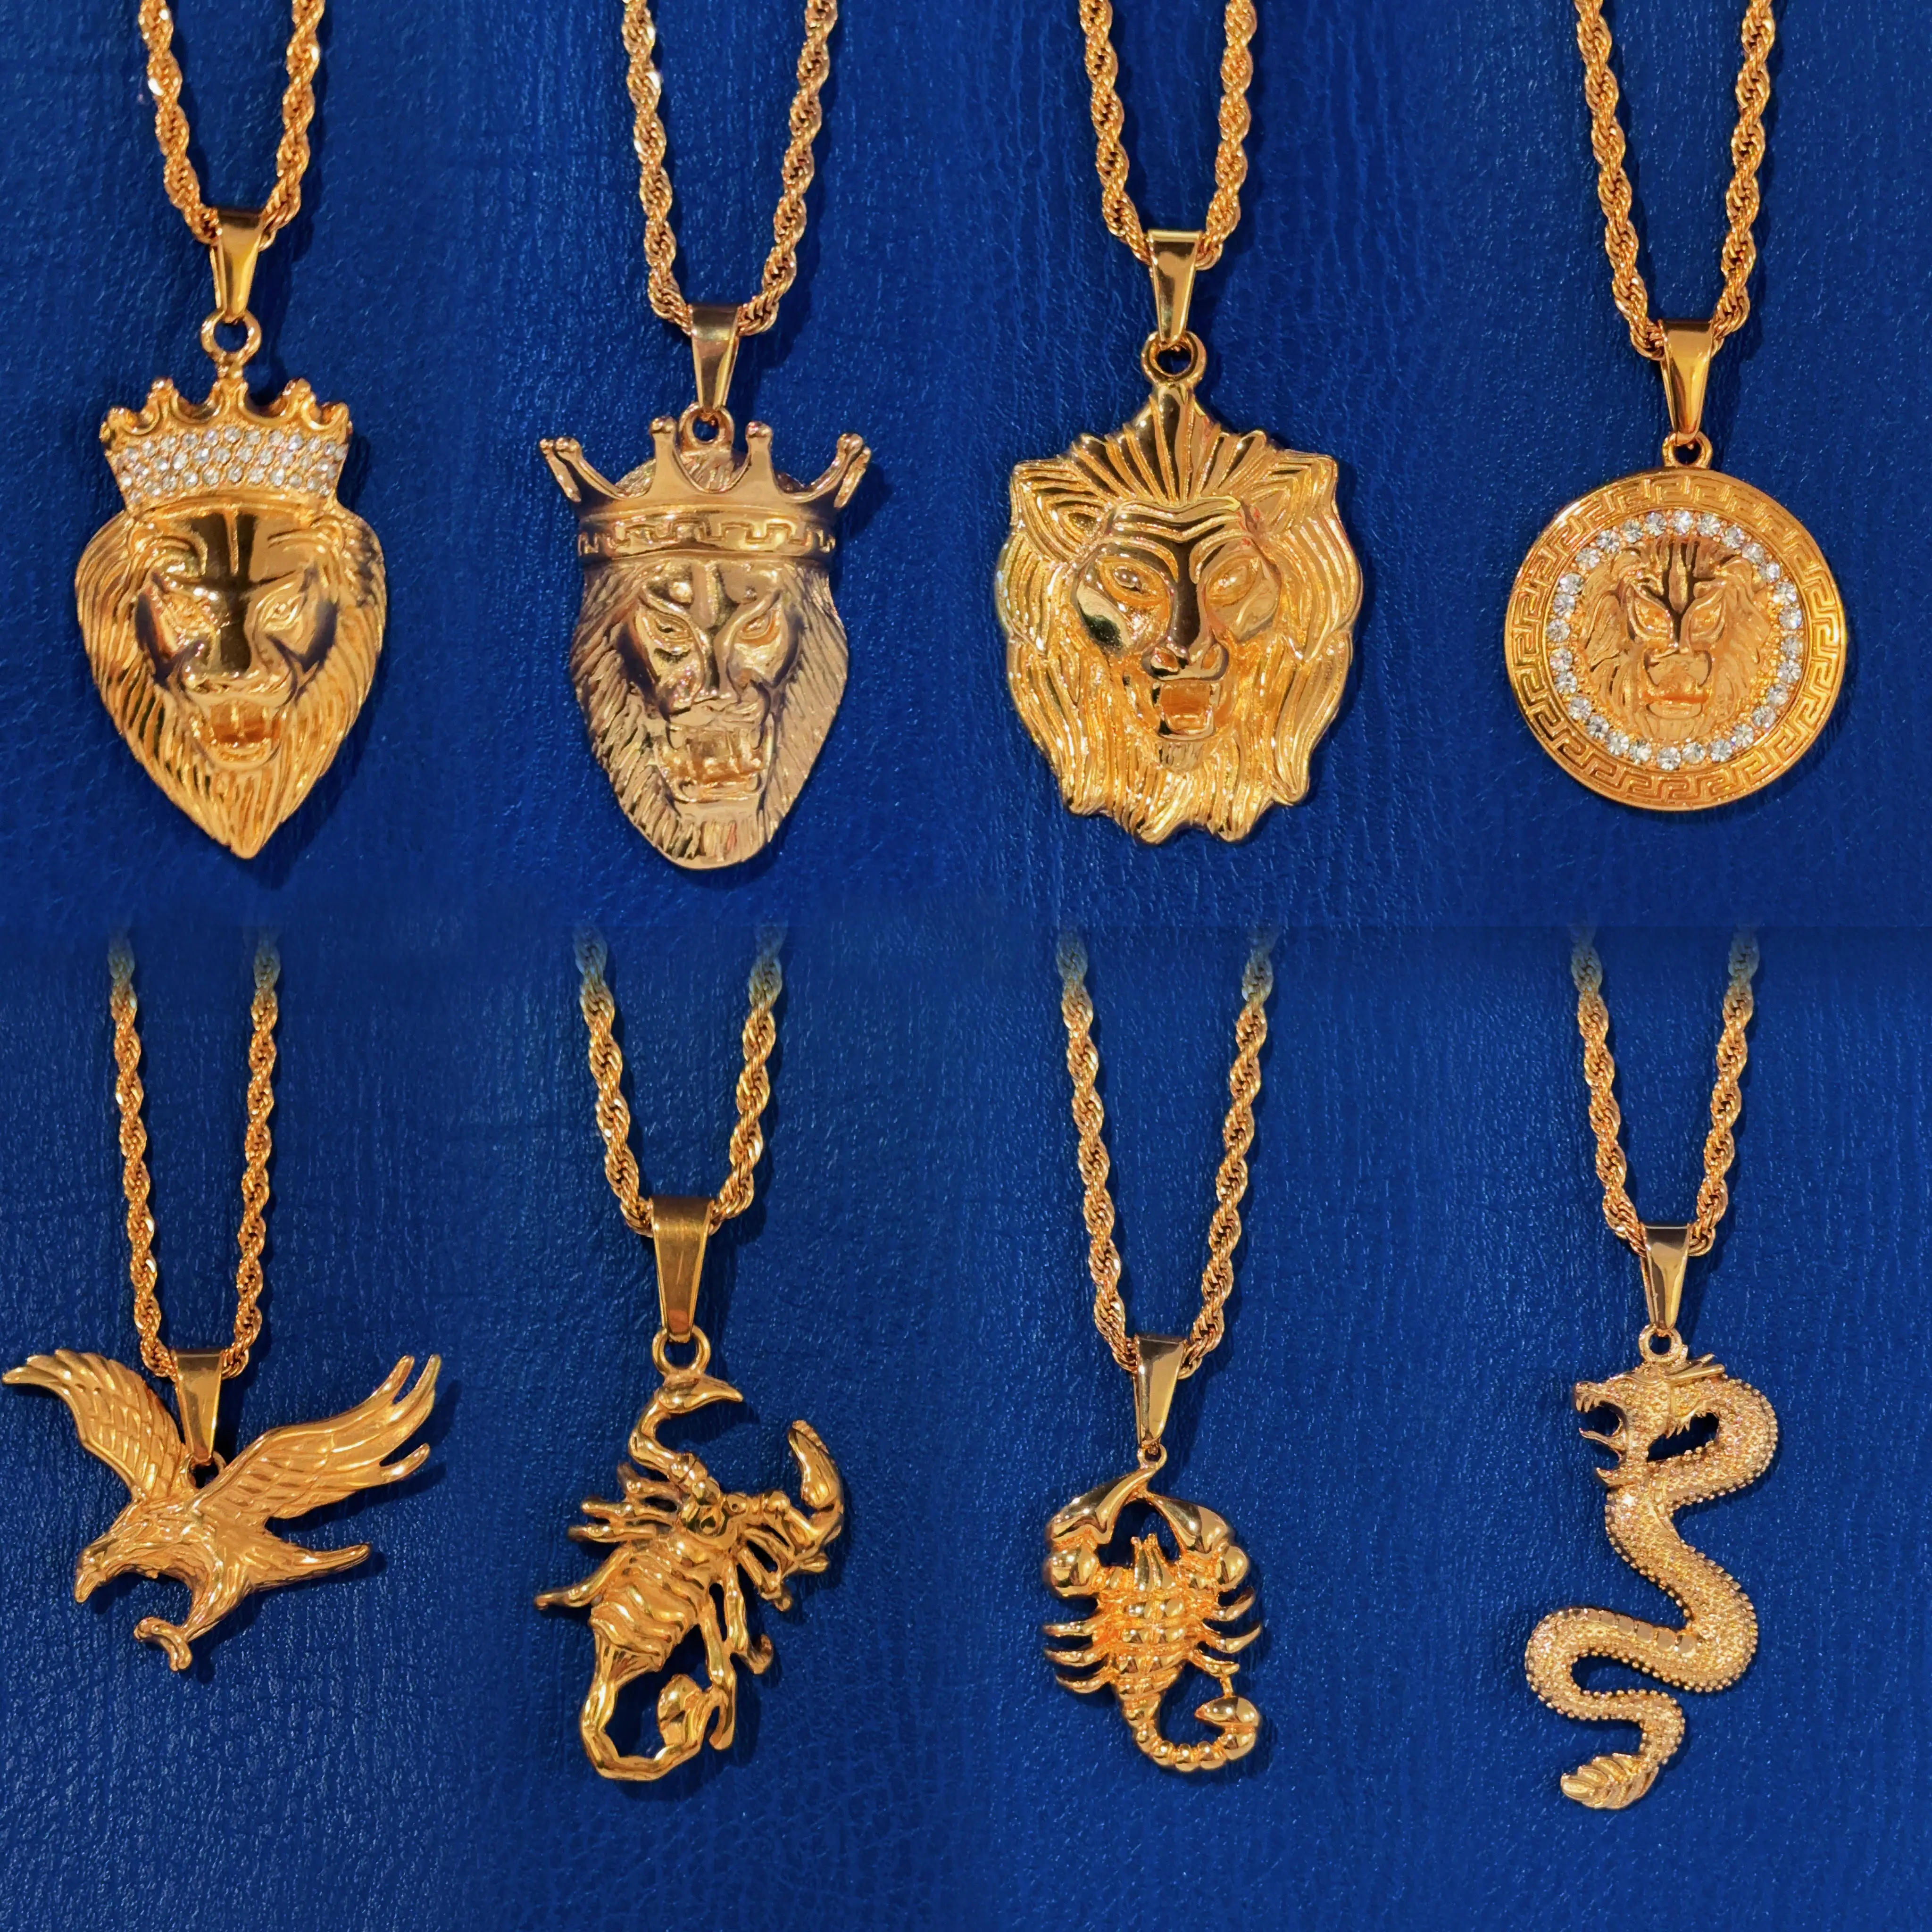 Wholesale Customized Stainless Steel Punk Jewelry 18k Gold Plated Men Lion Charm Pendant Necklace Jewelry